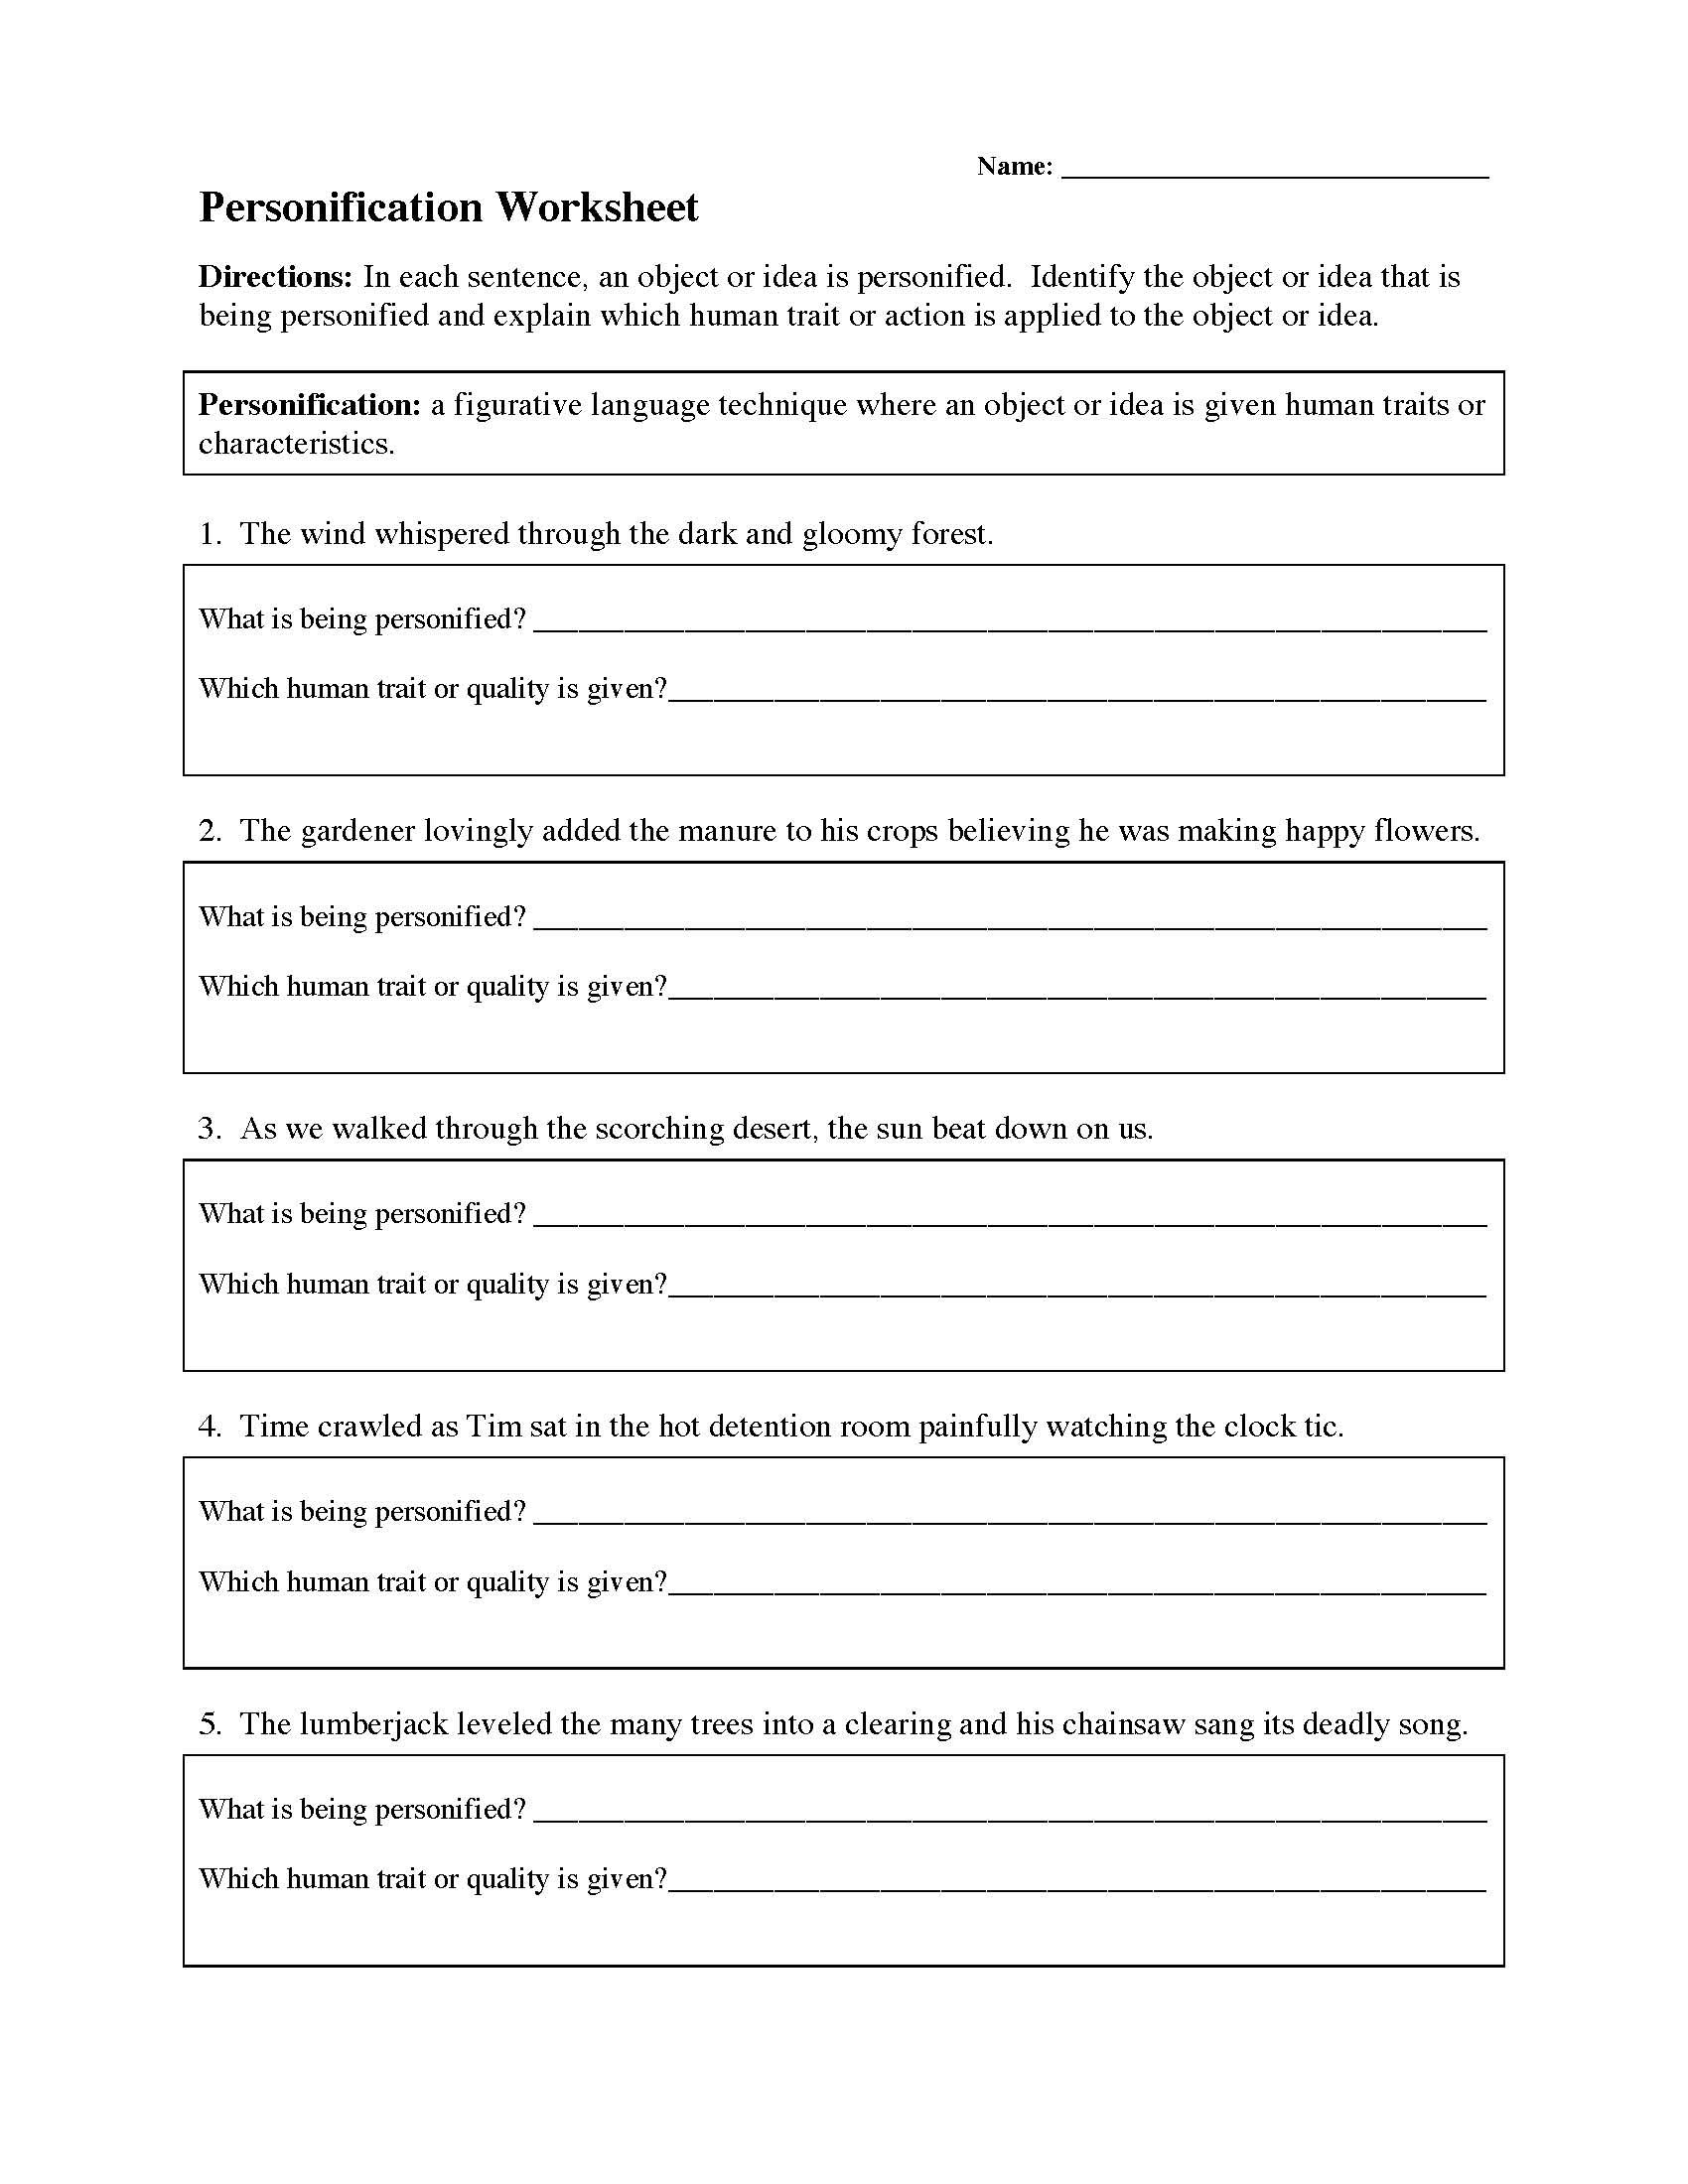 personification worksheets figurative language activities